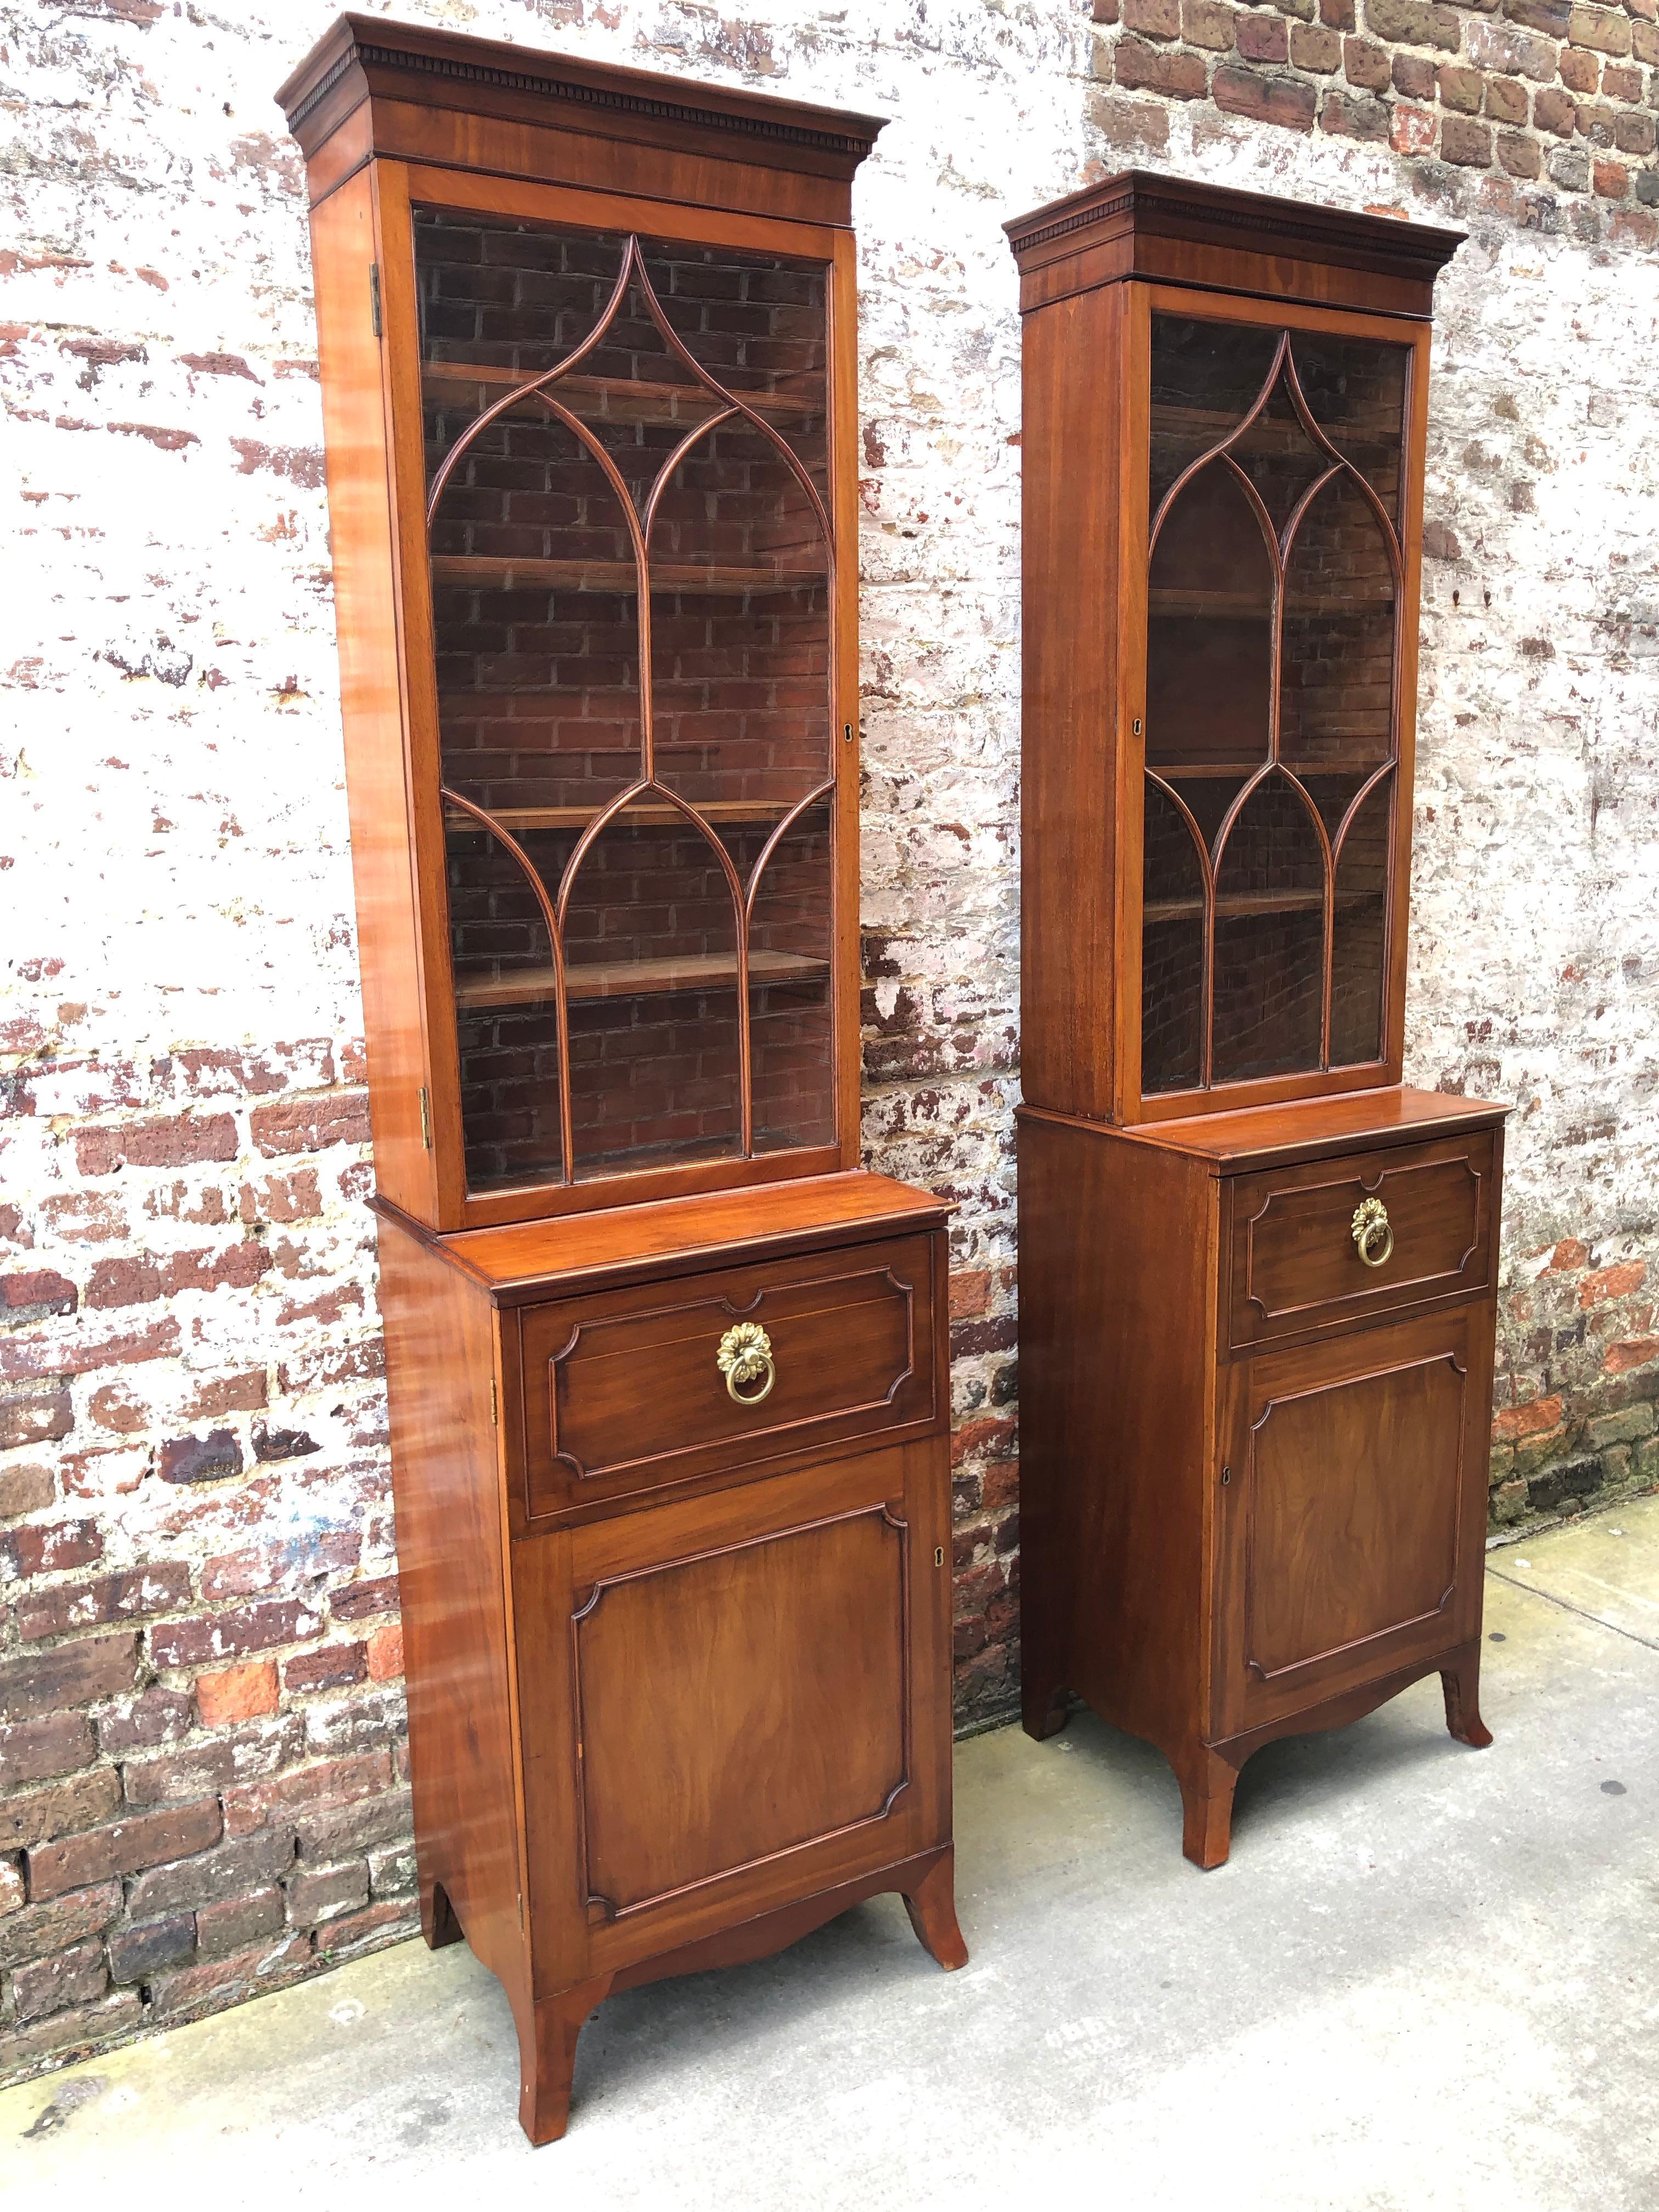 Pair of mahogany bookcases repurposed from a breakfront. The alteration was done within last 100 years.